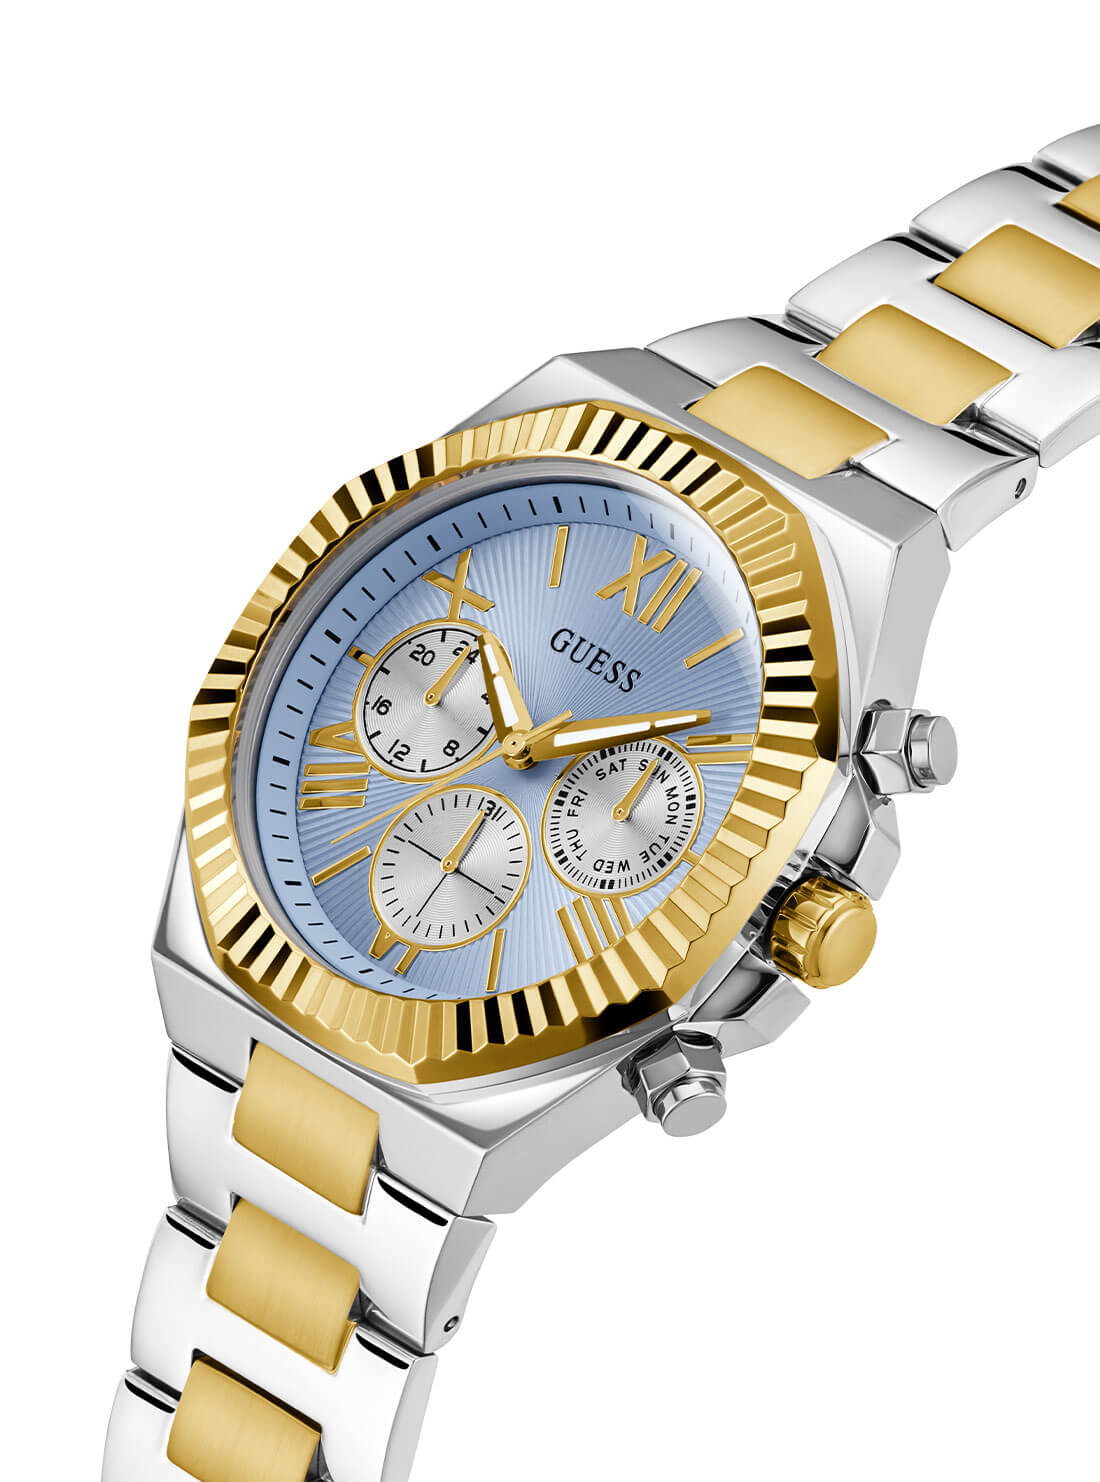 Silver and Gold Equity Blue Link Watch | GUESS men's watches | detail view